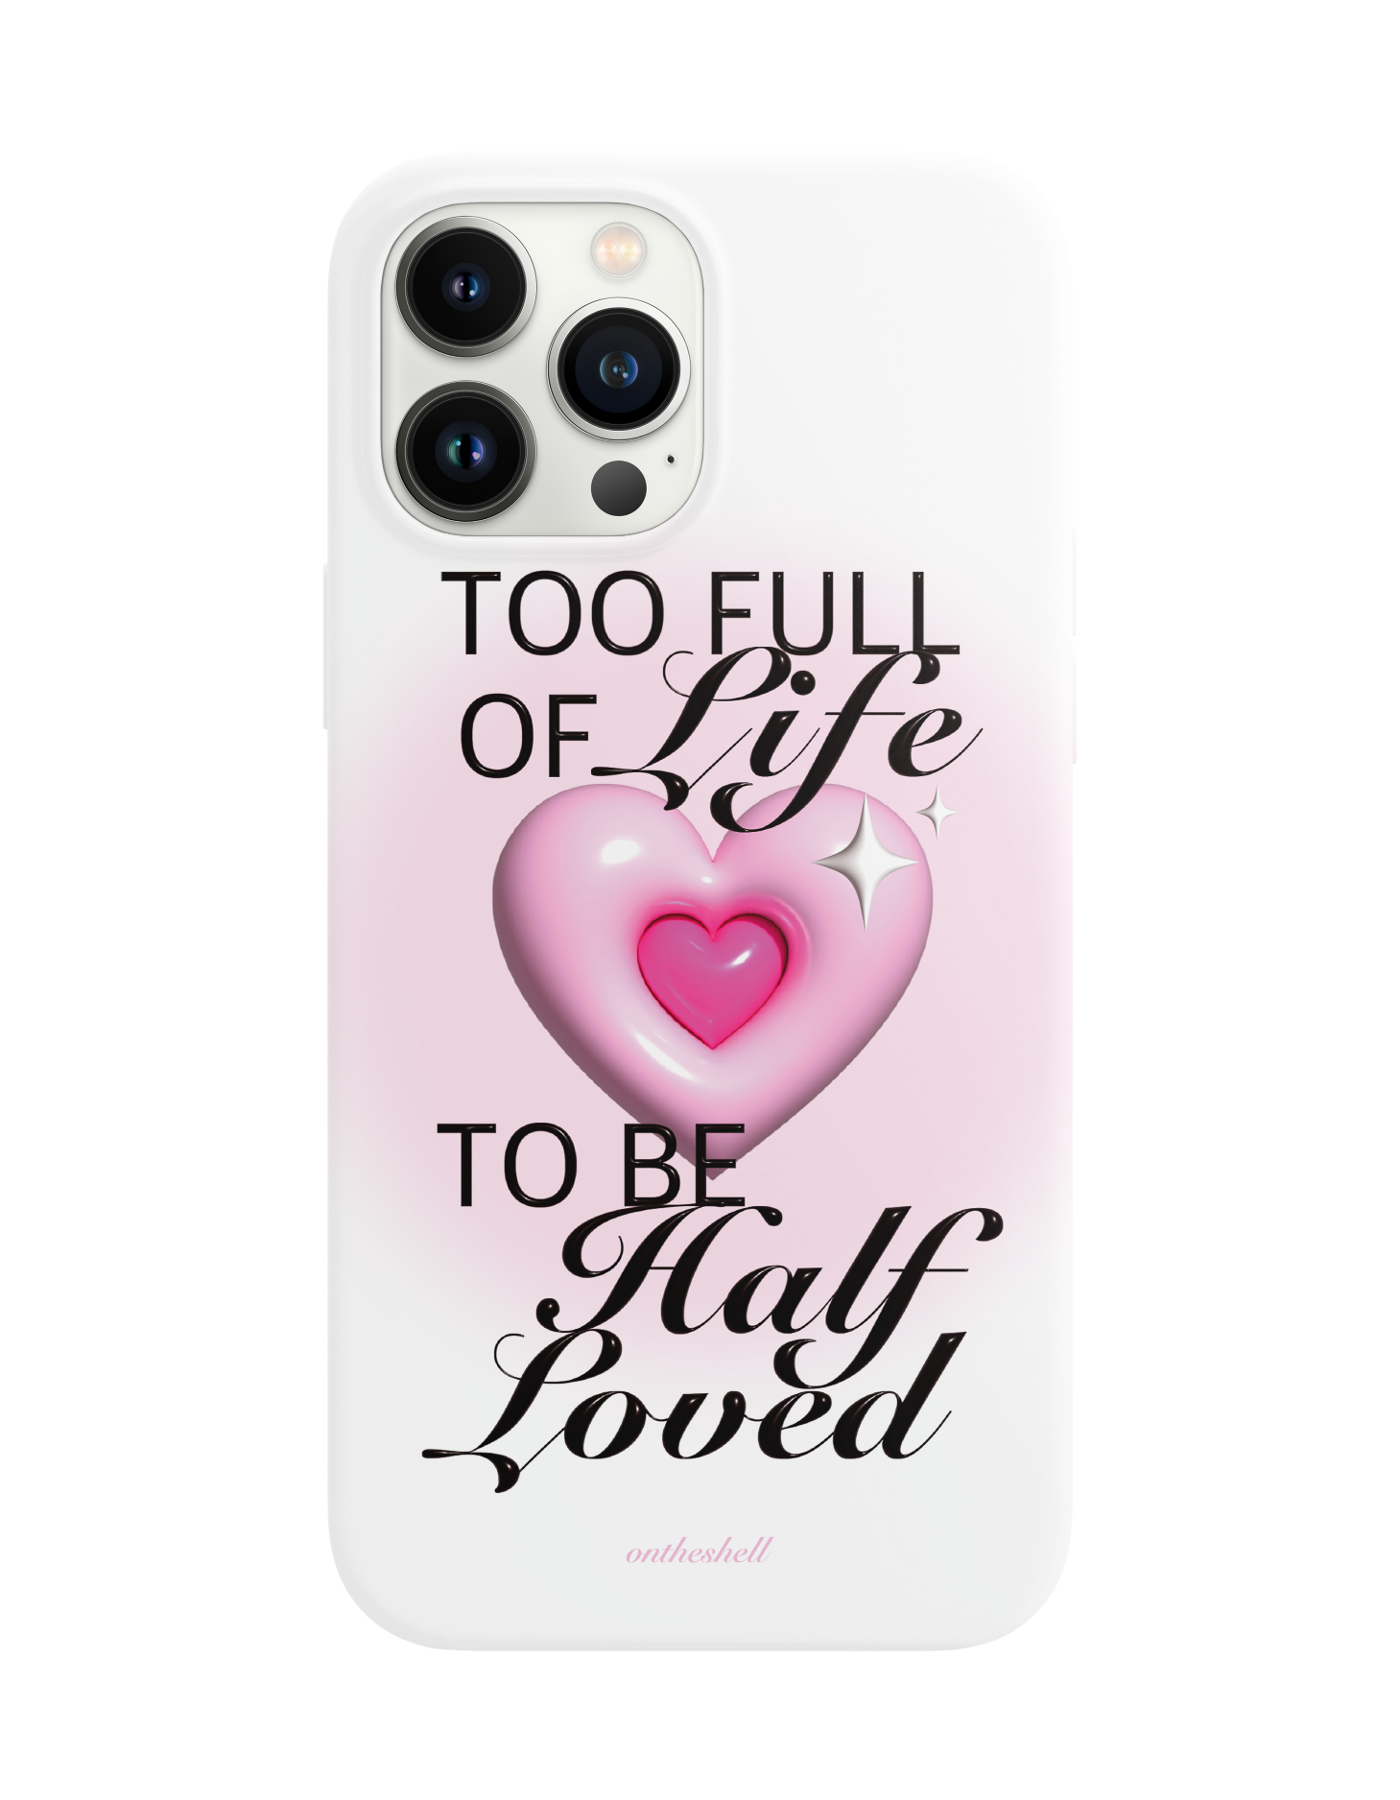 To be half loved Iphone case